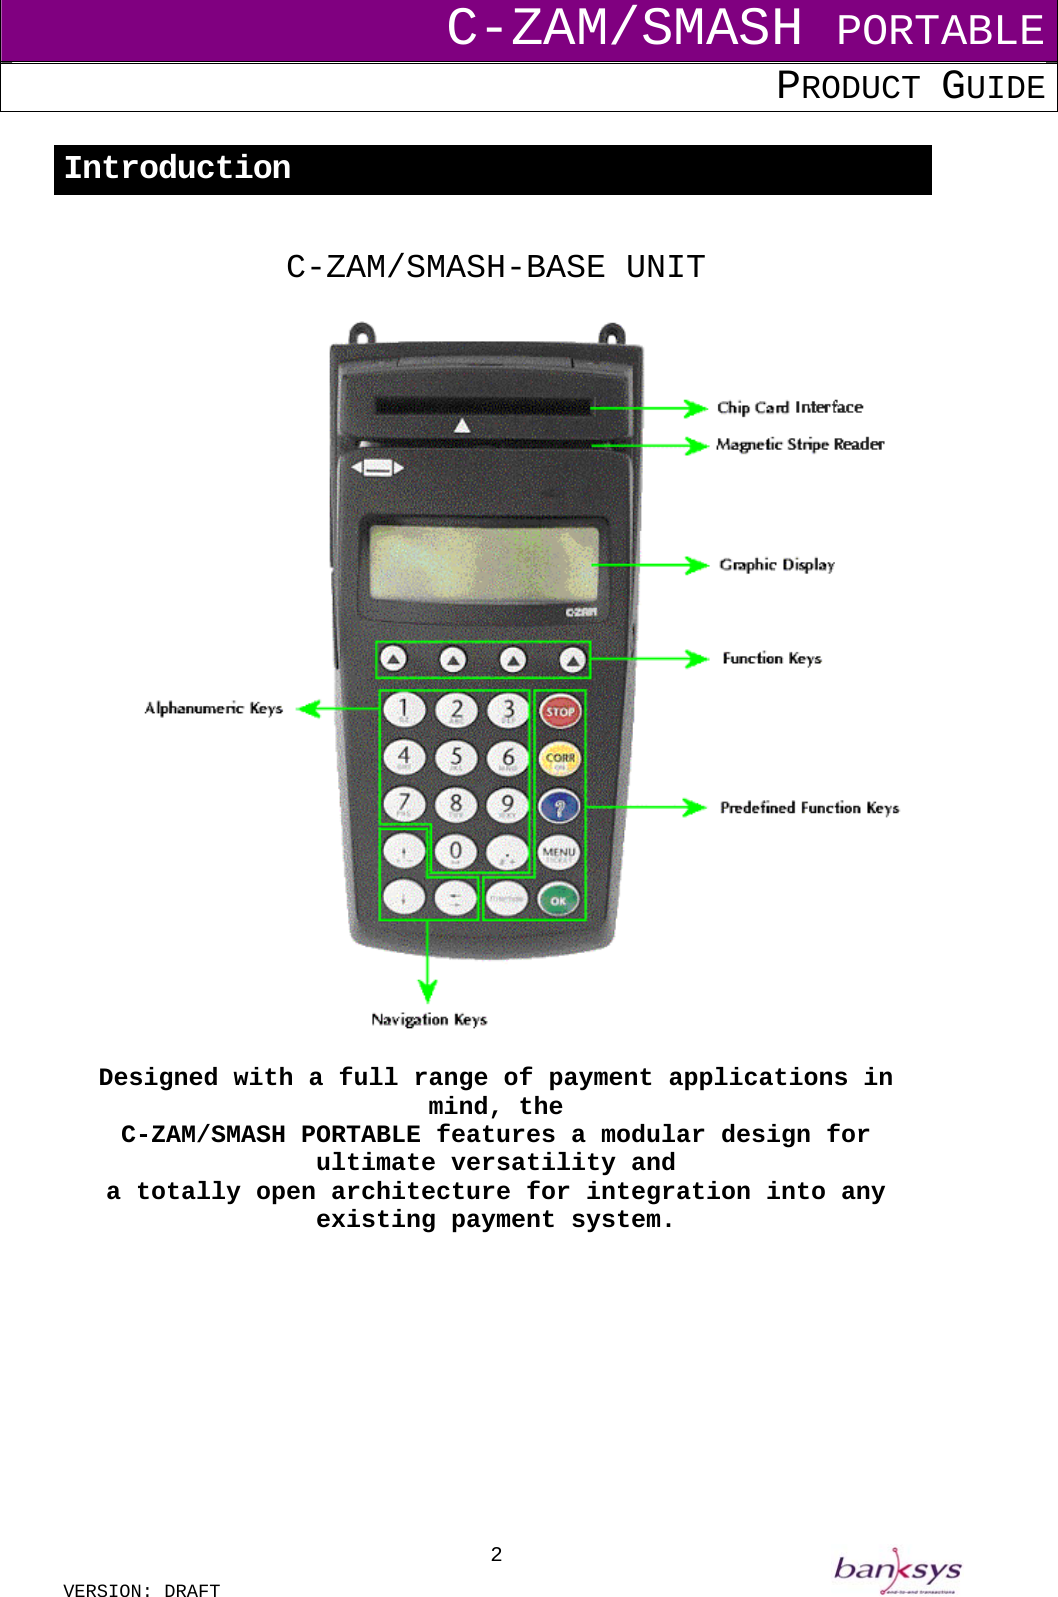 C-ZAM/SMASH PORTABLE PRODUCT GUIDE  VERSION: DRAFT     2Introduction  C-ZAM/SMASH-BASE UNIT    Designed with a full range of payment applications in mind, the C-ZAM/SMASH PORTABLE features a modular design for ultimate versatility and a totally open architecture for integration into any existing payment system.          